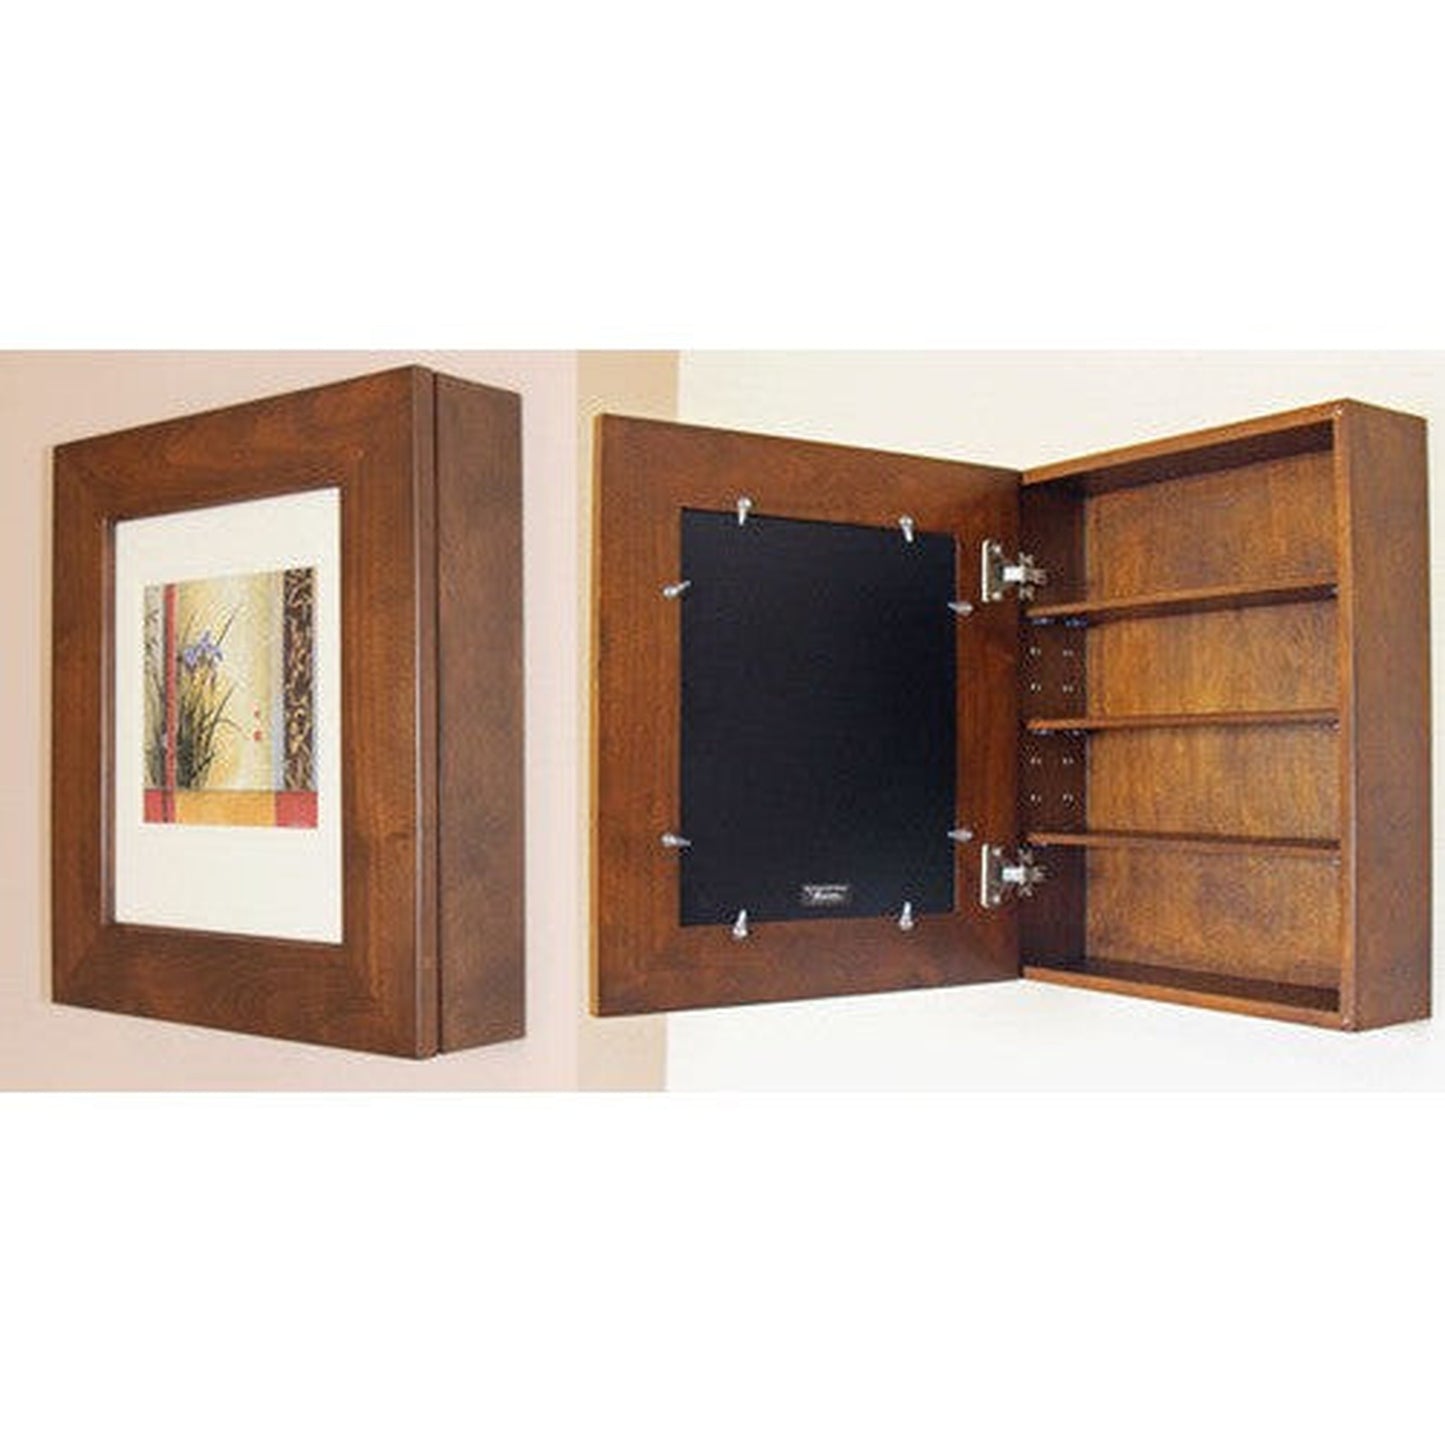 Fox Hollow Furnishings 20" x 17" Caramel Wall Mount Picture Frame Medicine Cabinet